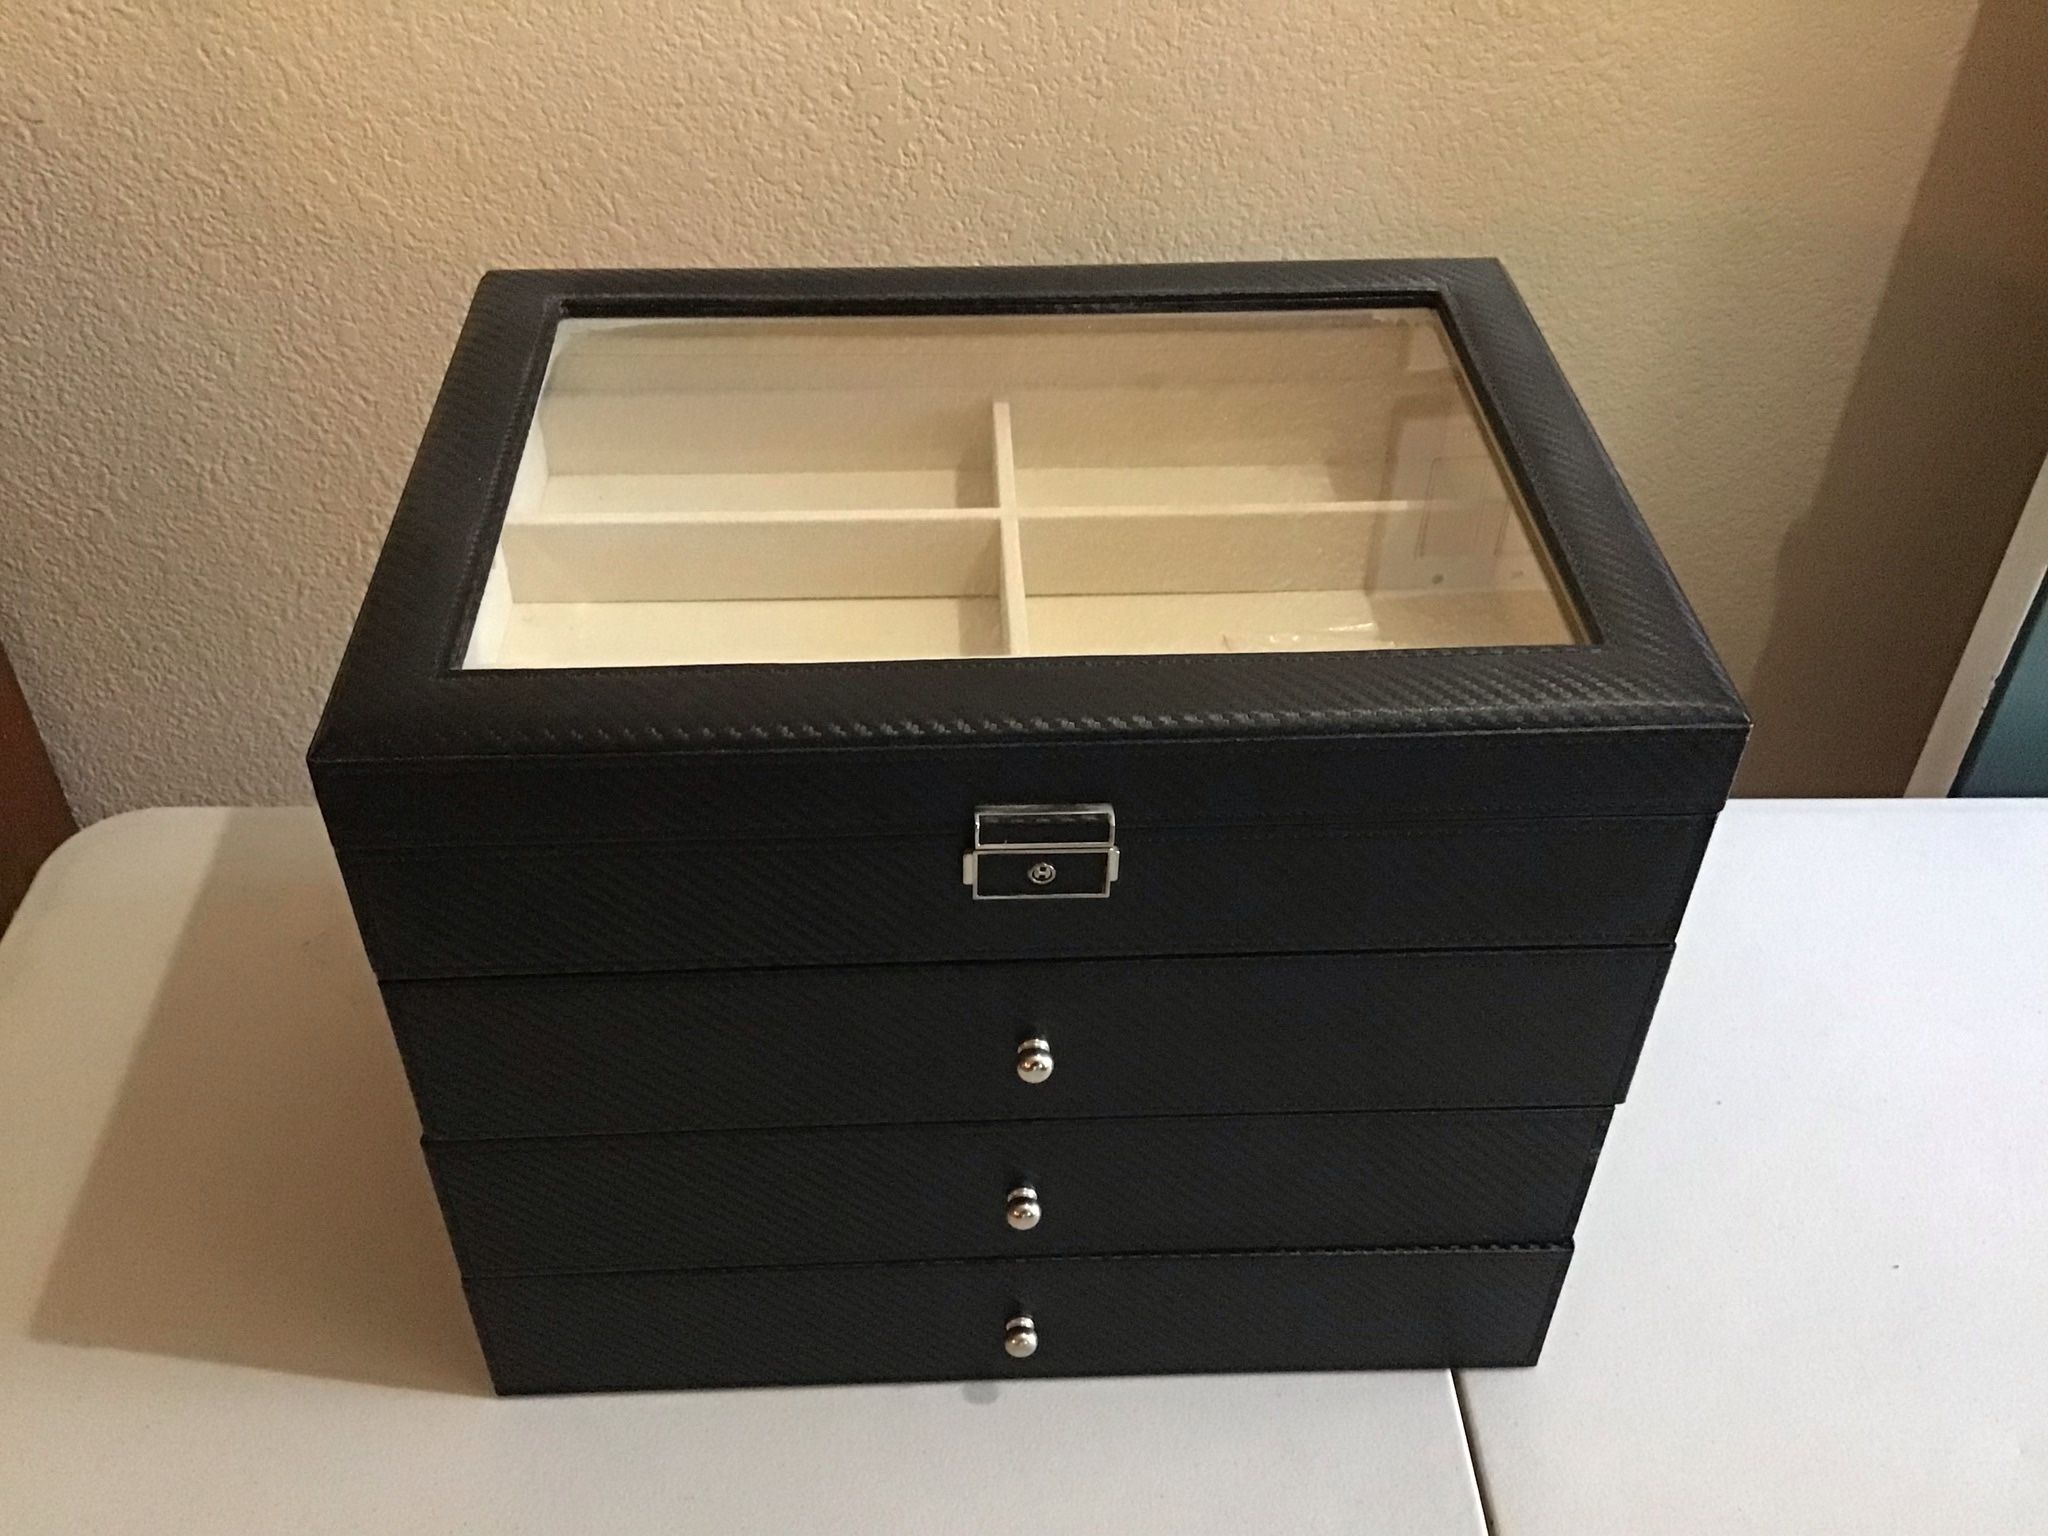 Sunglass Four Level Drawer Display Case